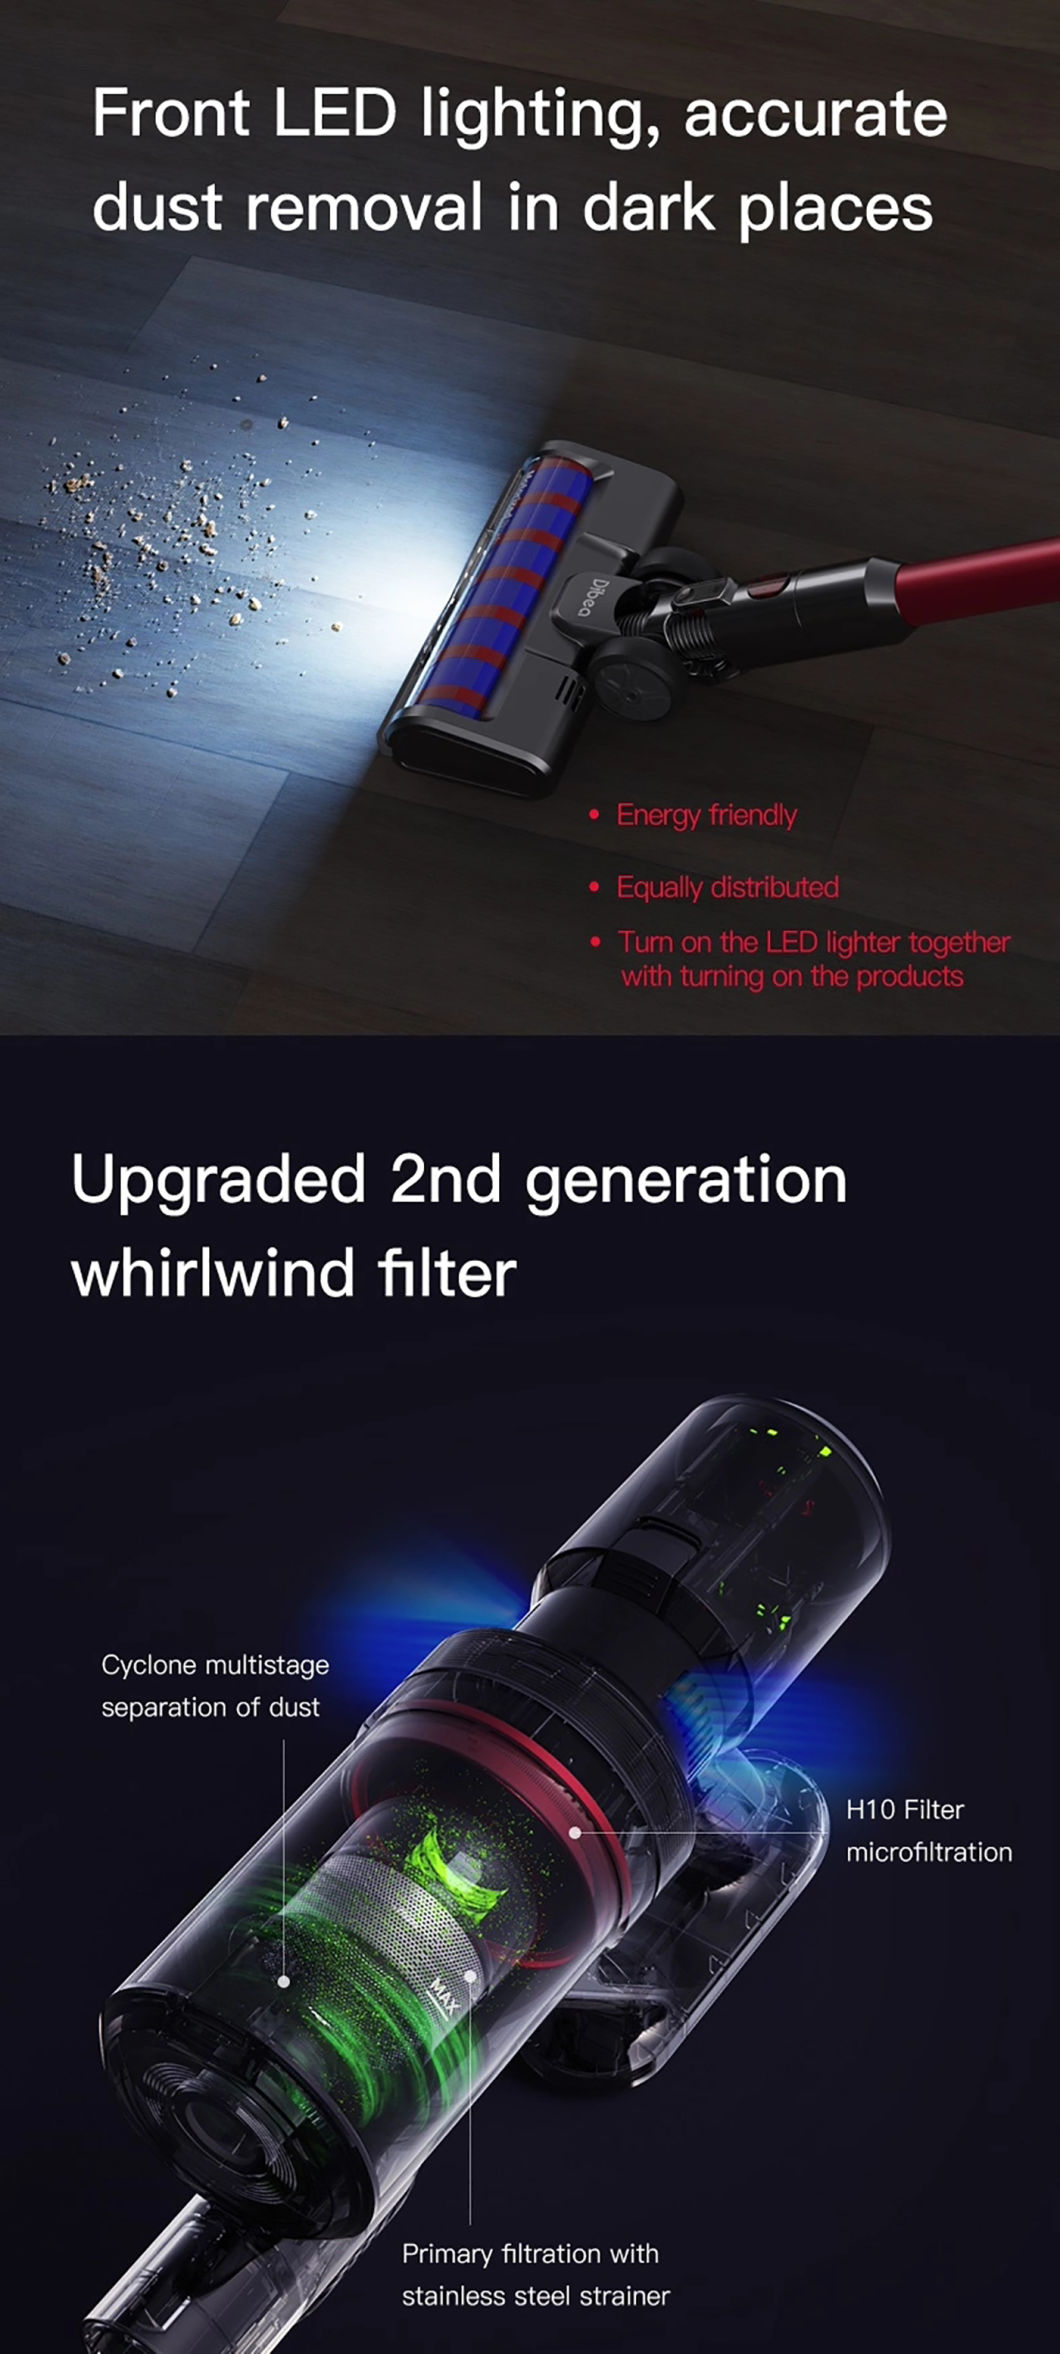 Handheld Wireless Vacuum Cleaner Strong Suction Power Cordless Home Used Portable for Vacuum Cleaner